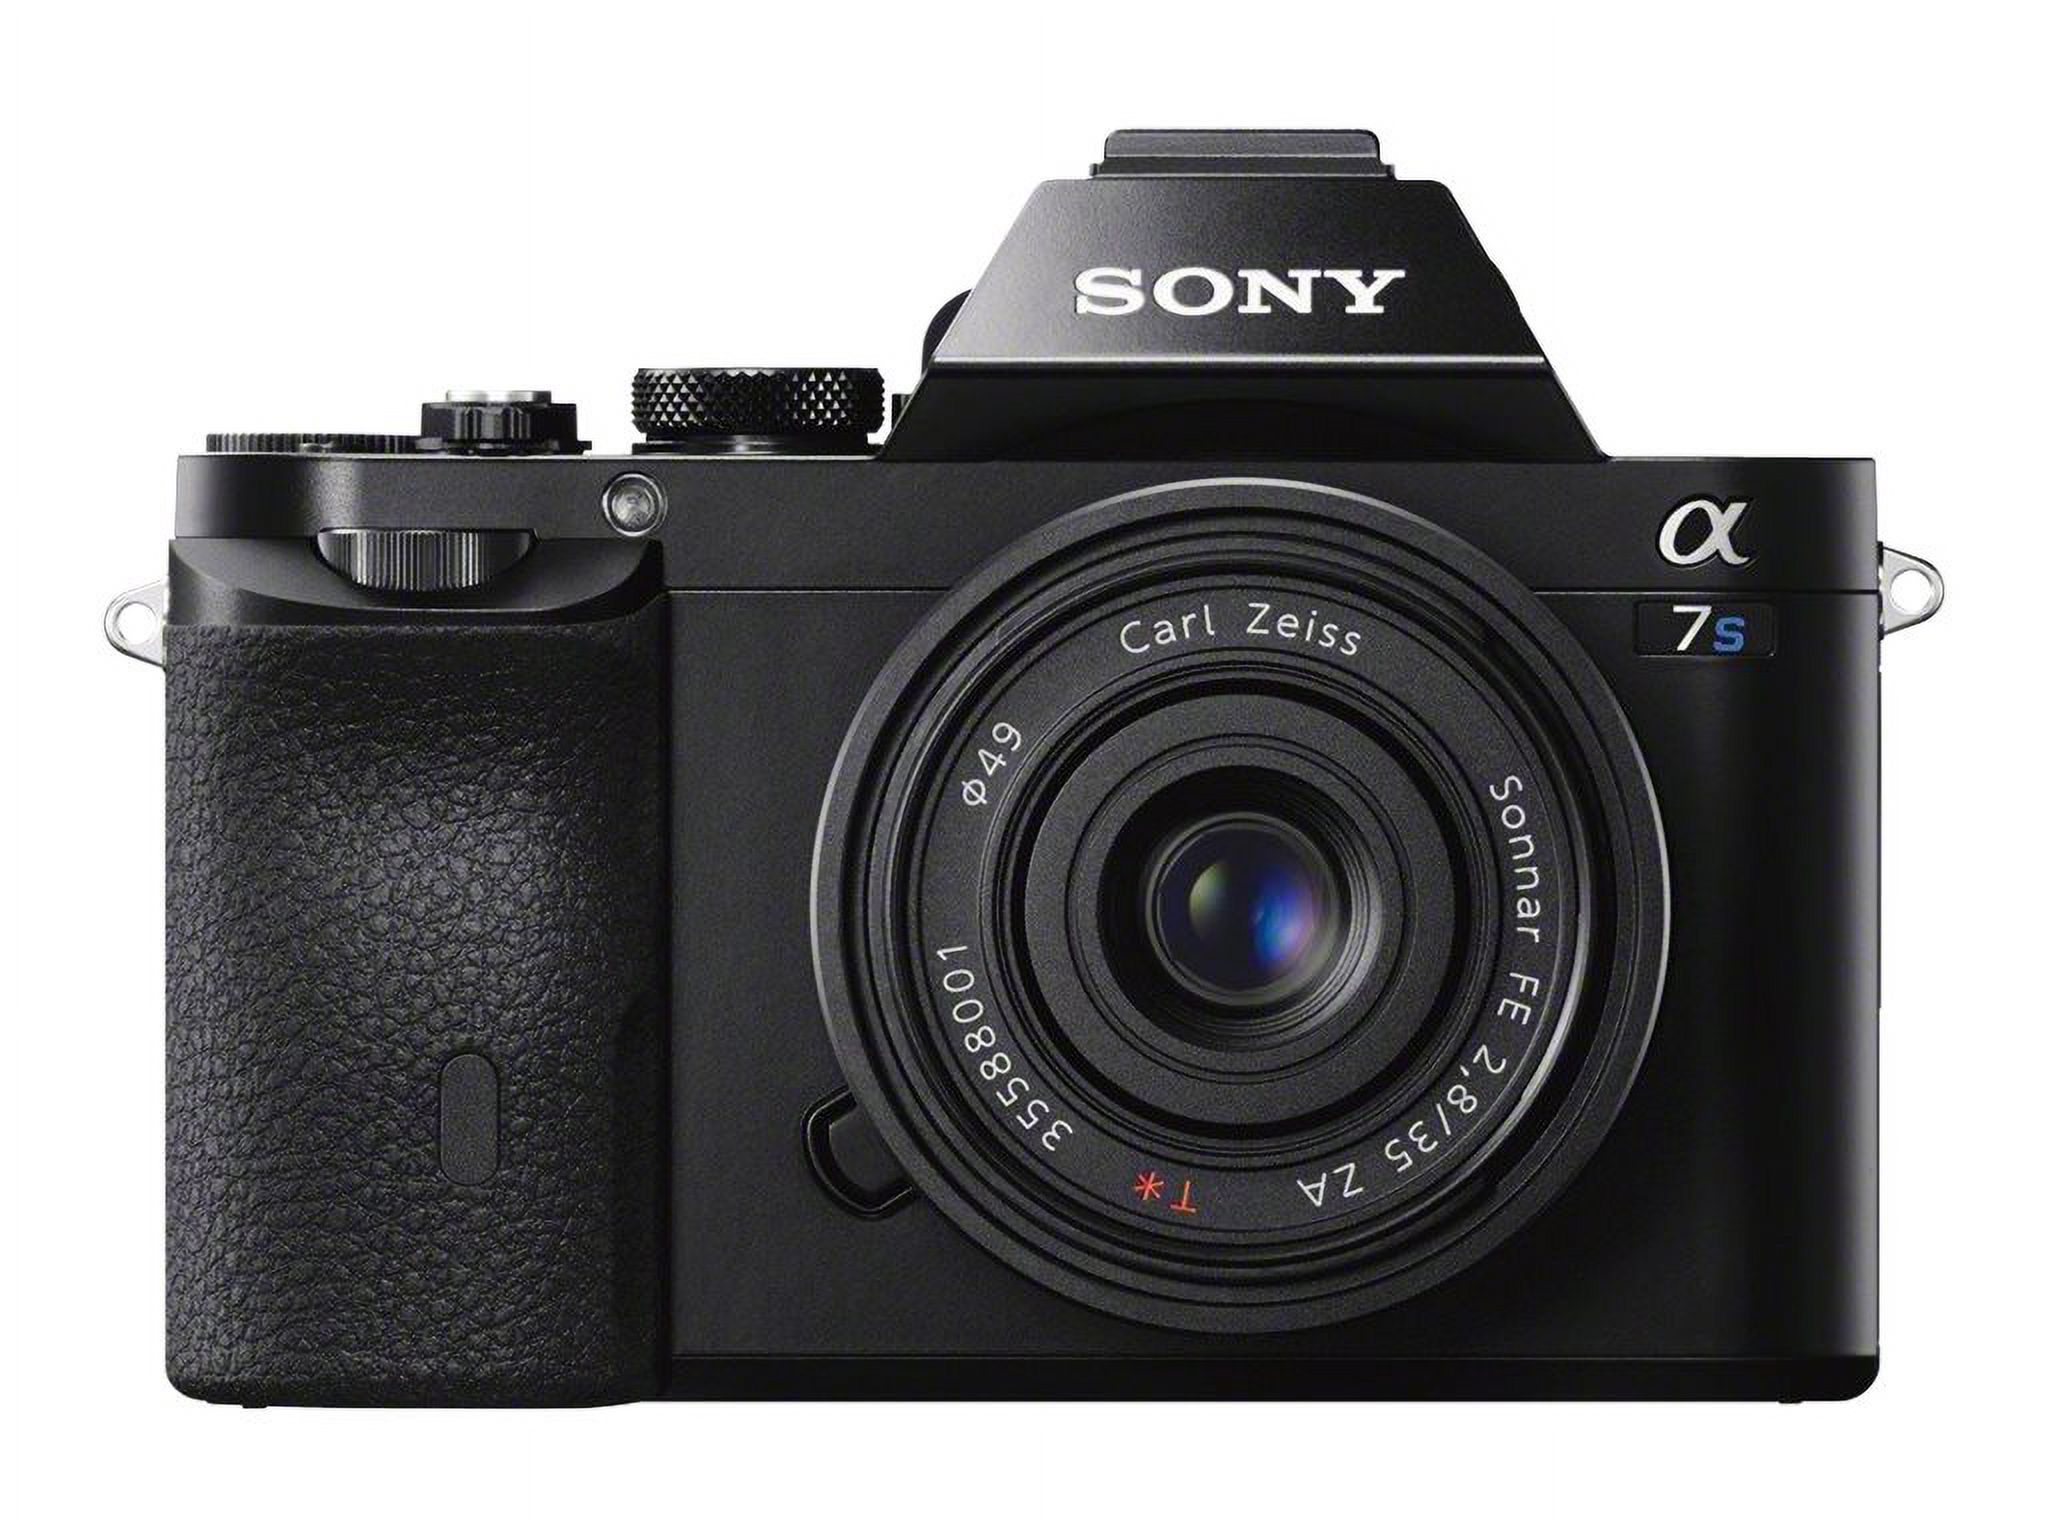 Sony a7s ILCE-7S - Digital camera - mirrorless - 12.2 MP - Full Frame - 1080p / 60 fps - body only - Wireless LAN, NFC - black - image 4 of 15